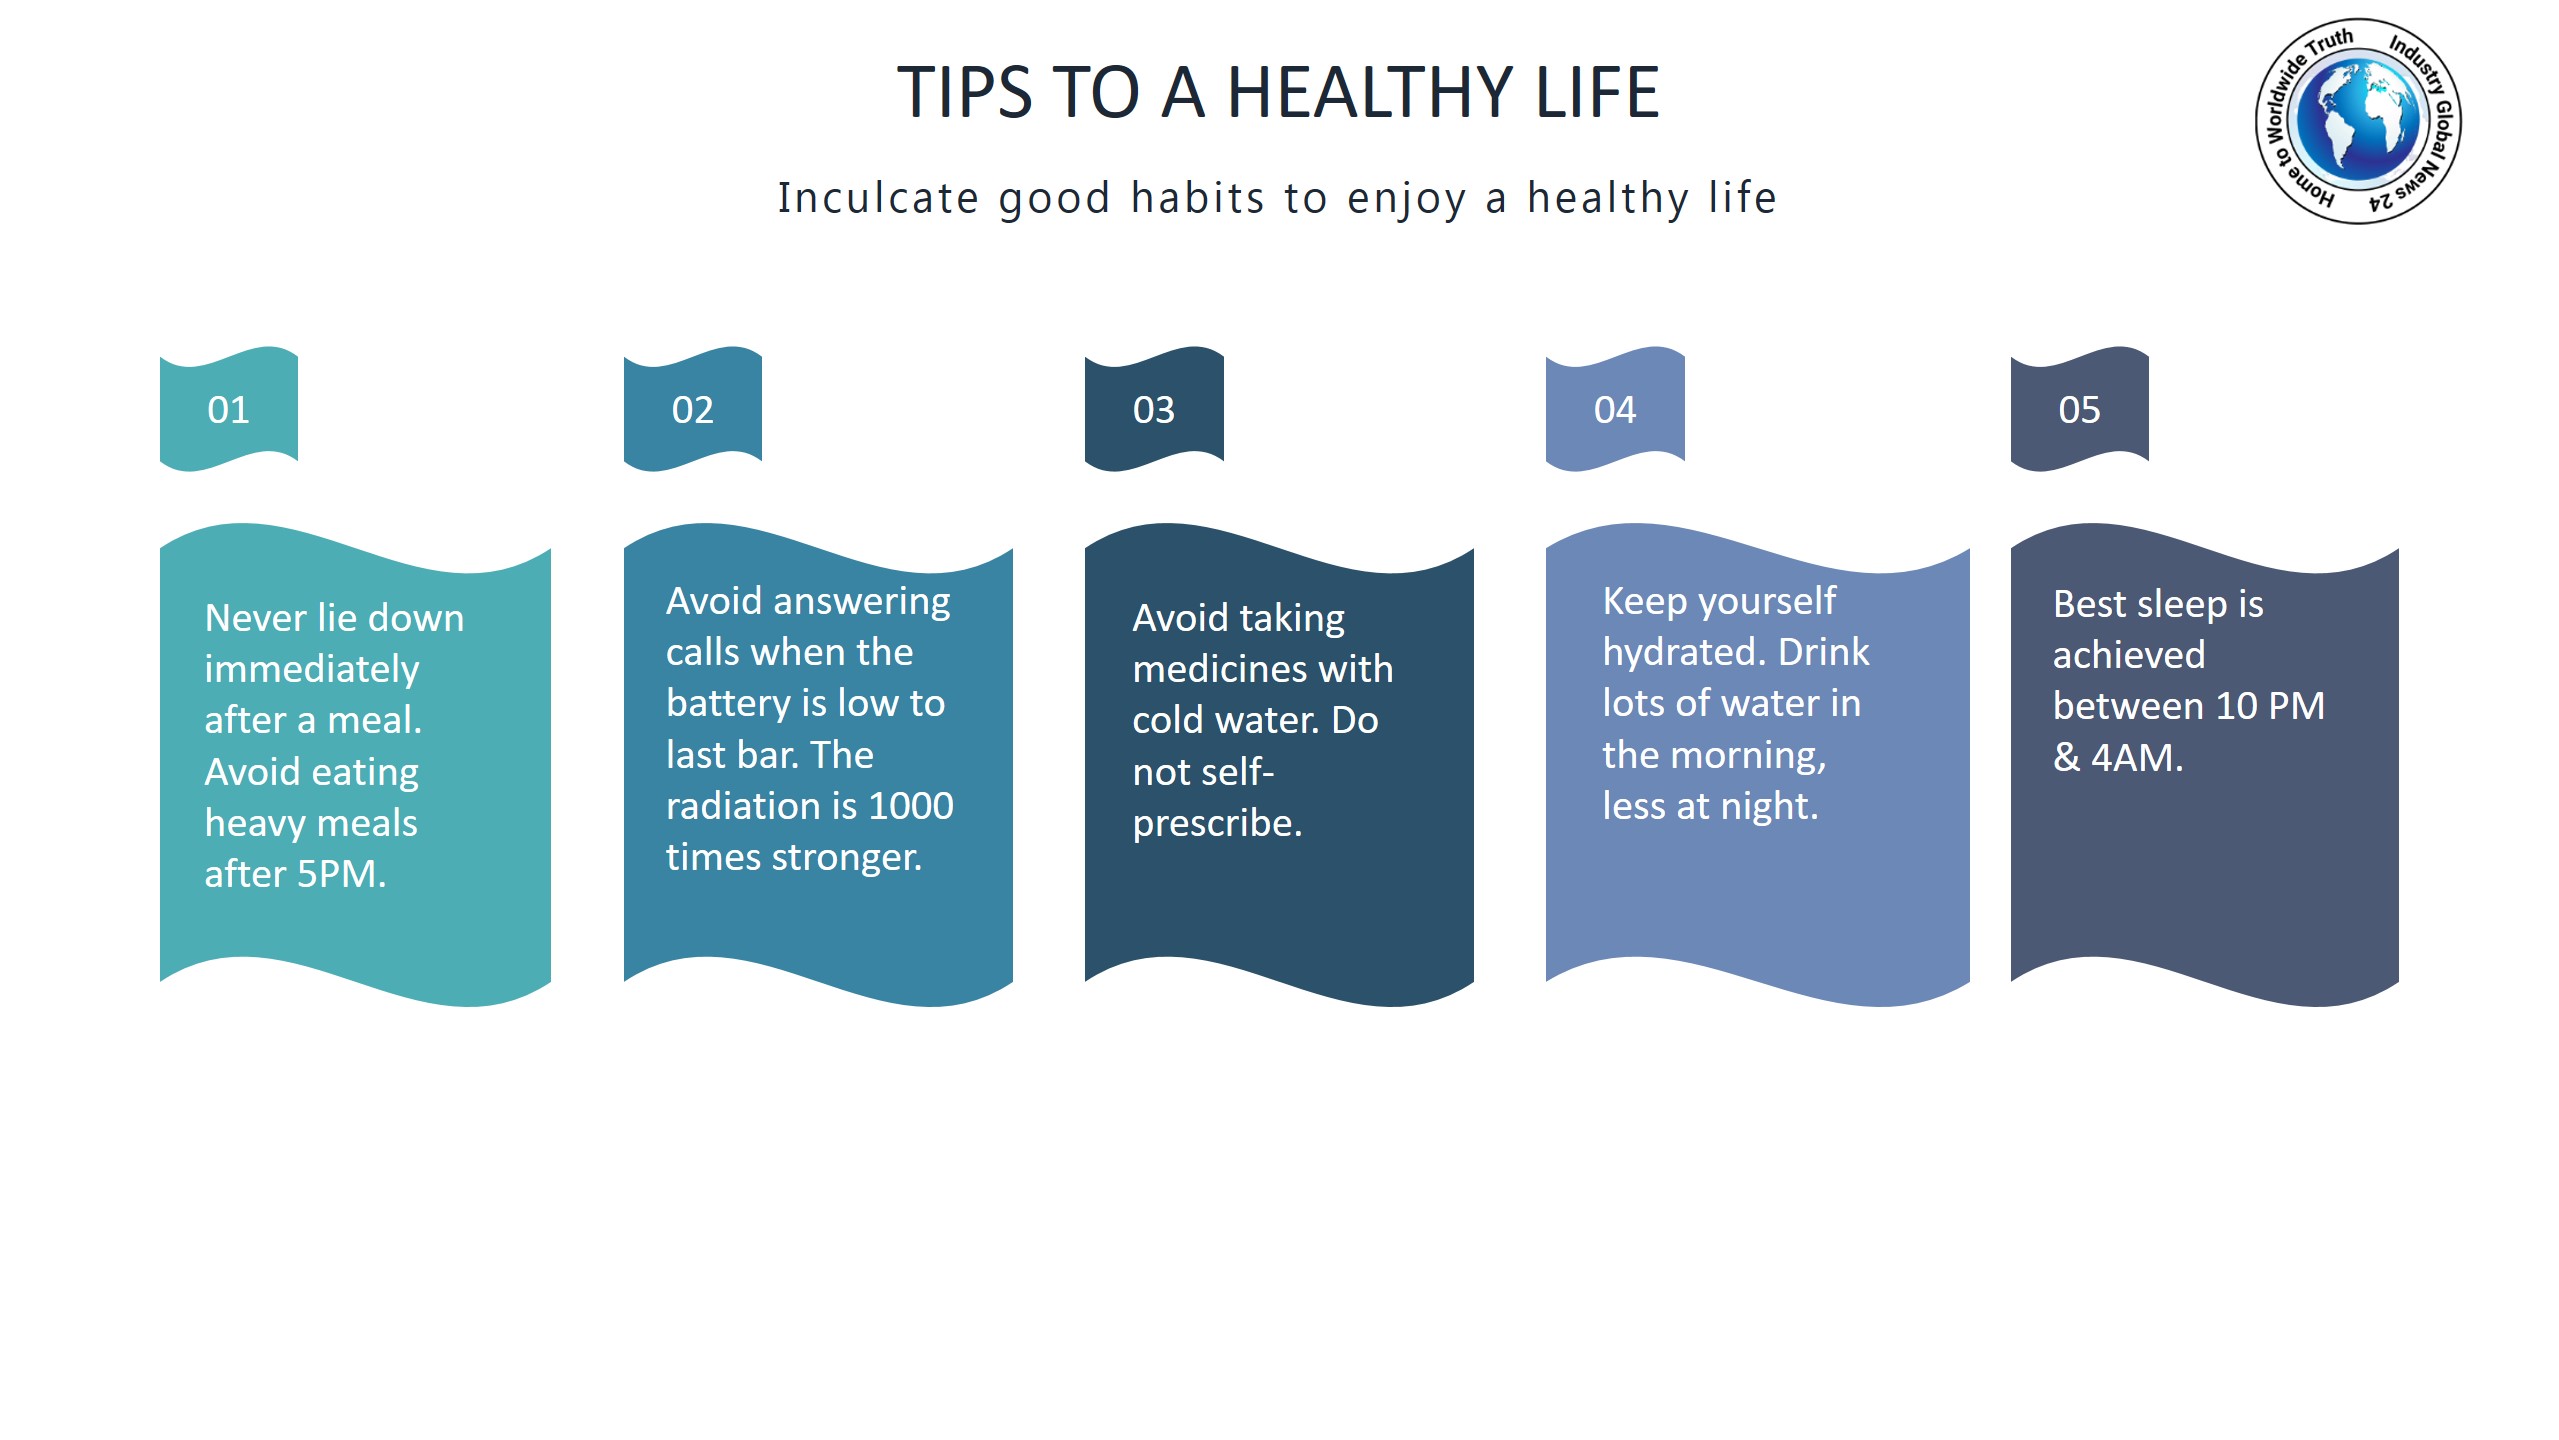 Tips to a healthy life